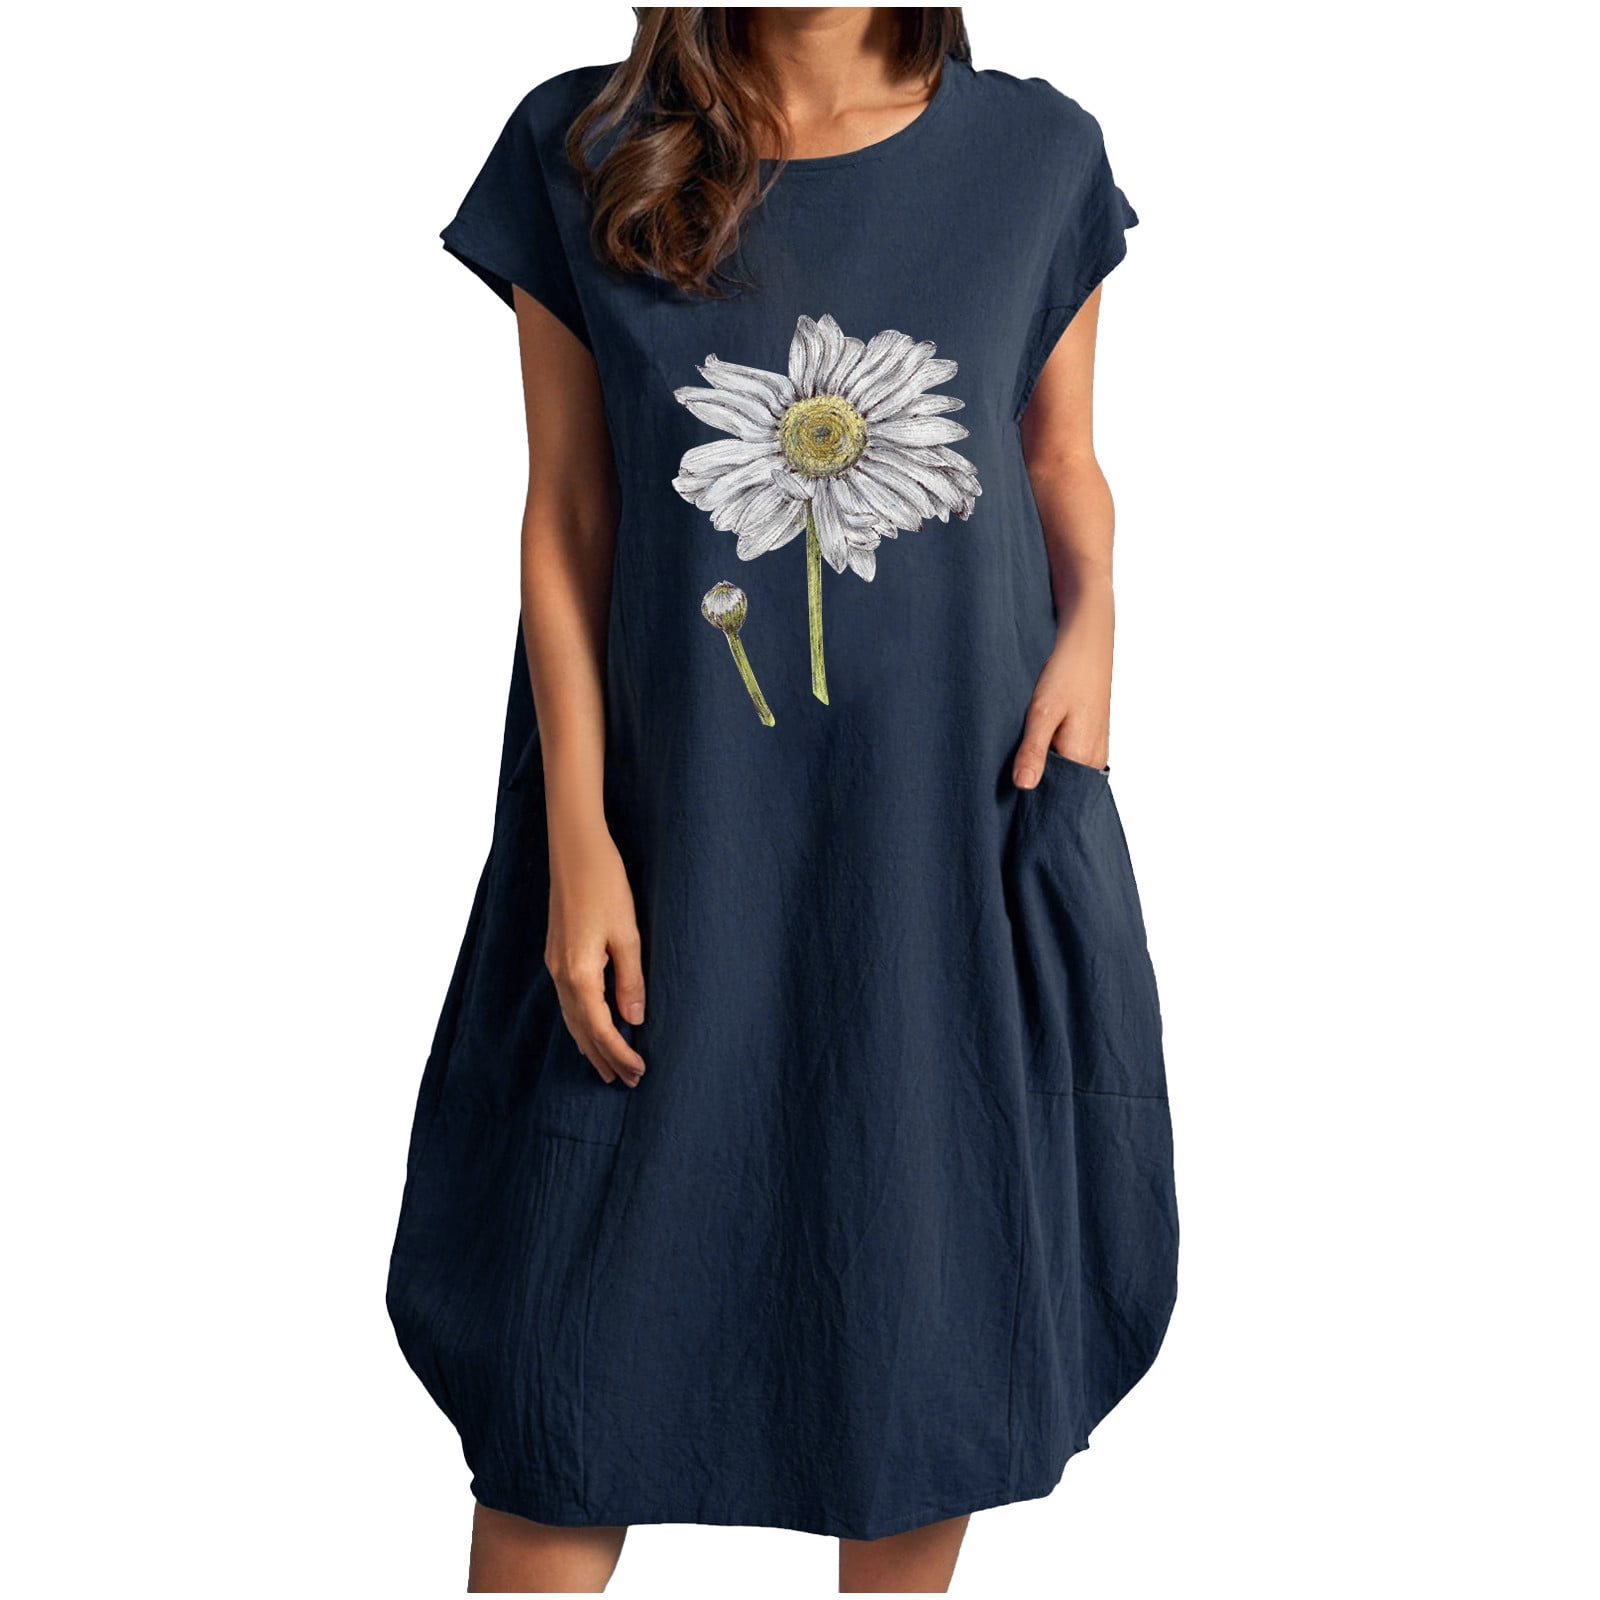 Olyvenn Discount Midi Dresses for Women Double Pocket Floral Daisy Print  Loose Casual Tunic Fashion Ladies Sundress Cotton and Linen Crew Neck Short  ...